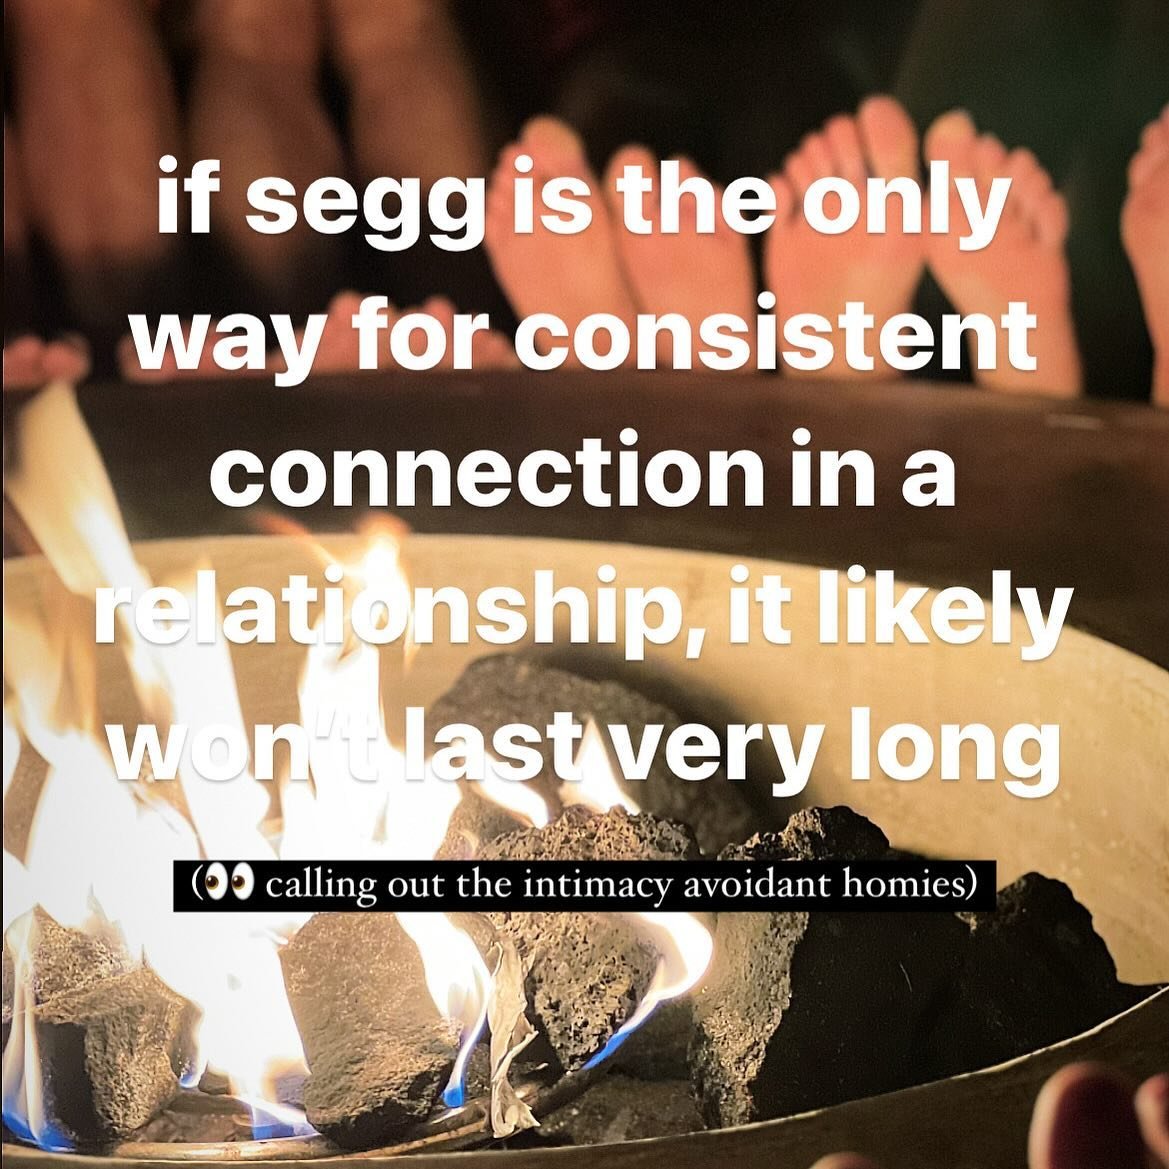 Do you know how many external variables can alter our segg lives?
A lot. 

In my work with couples, I&rsquo;ve noticed there&rsquo;s a lot of pressure around the frequency, not quality, of segg (I&rsquo;m talking p&amp;v)

Firstly, this is quite limi